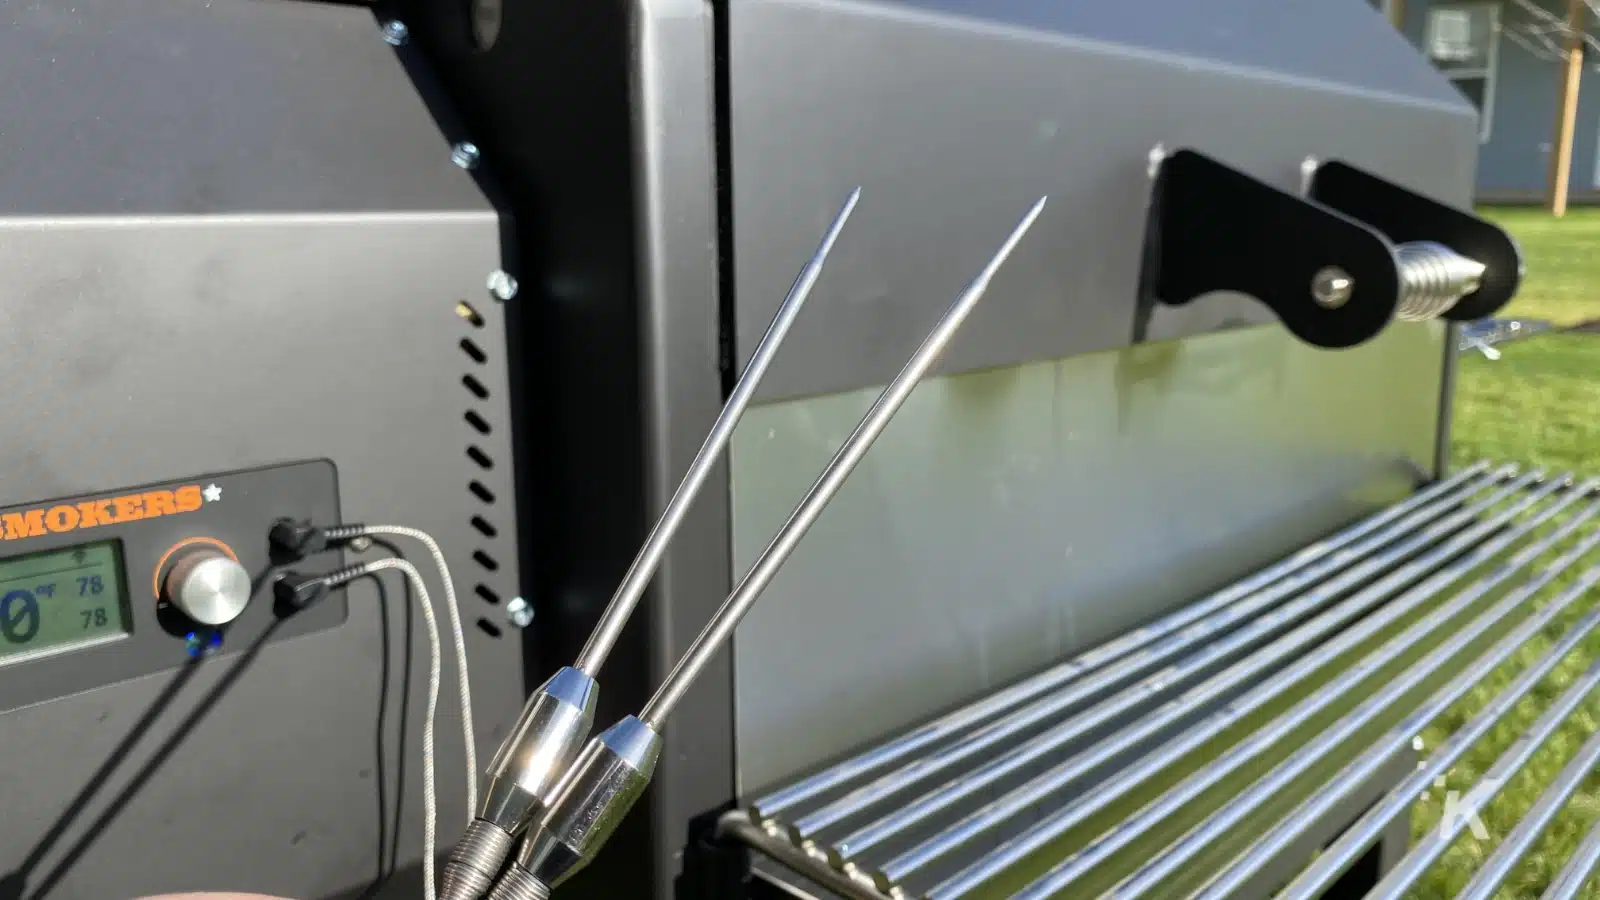 two temperature probes in front of a yoder pellet grill